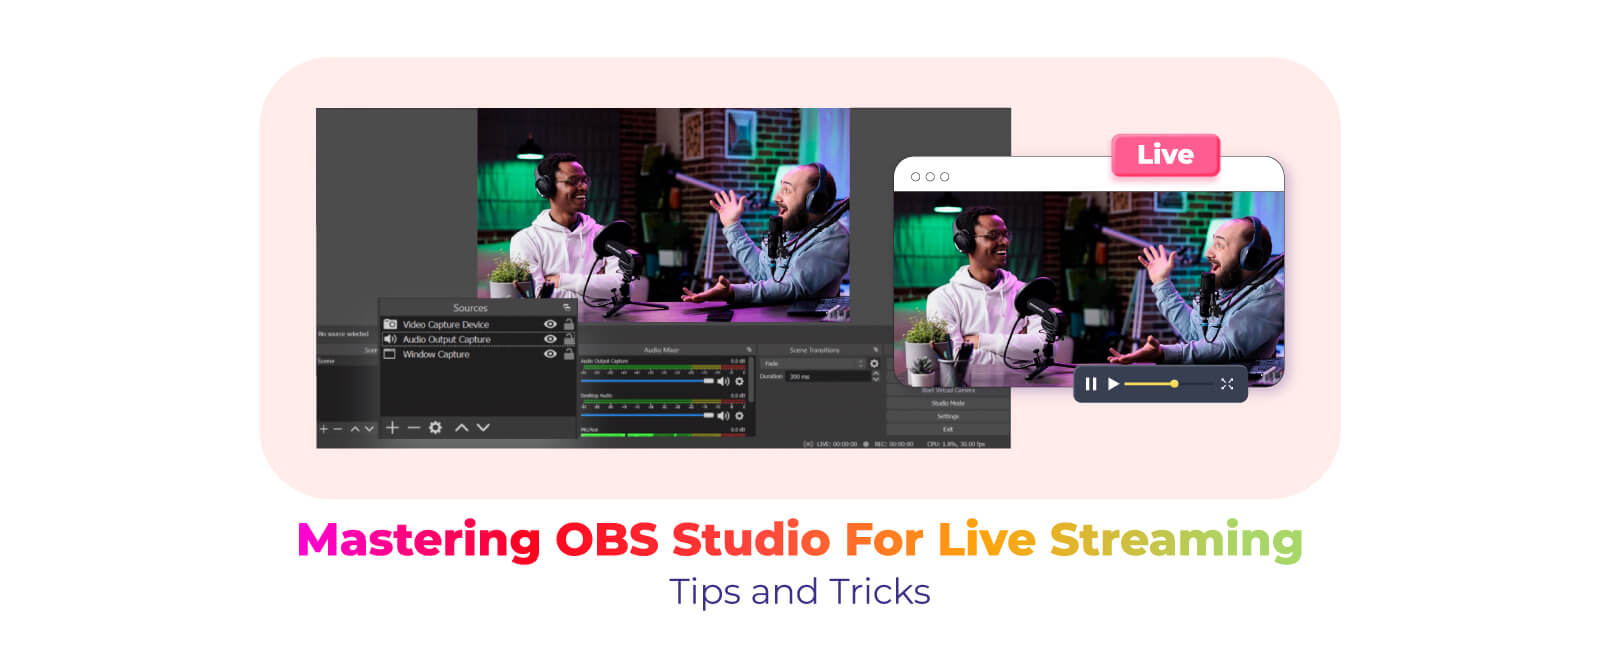 Mastering OBS Studio for Live Streaming: Tips and Tricks